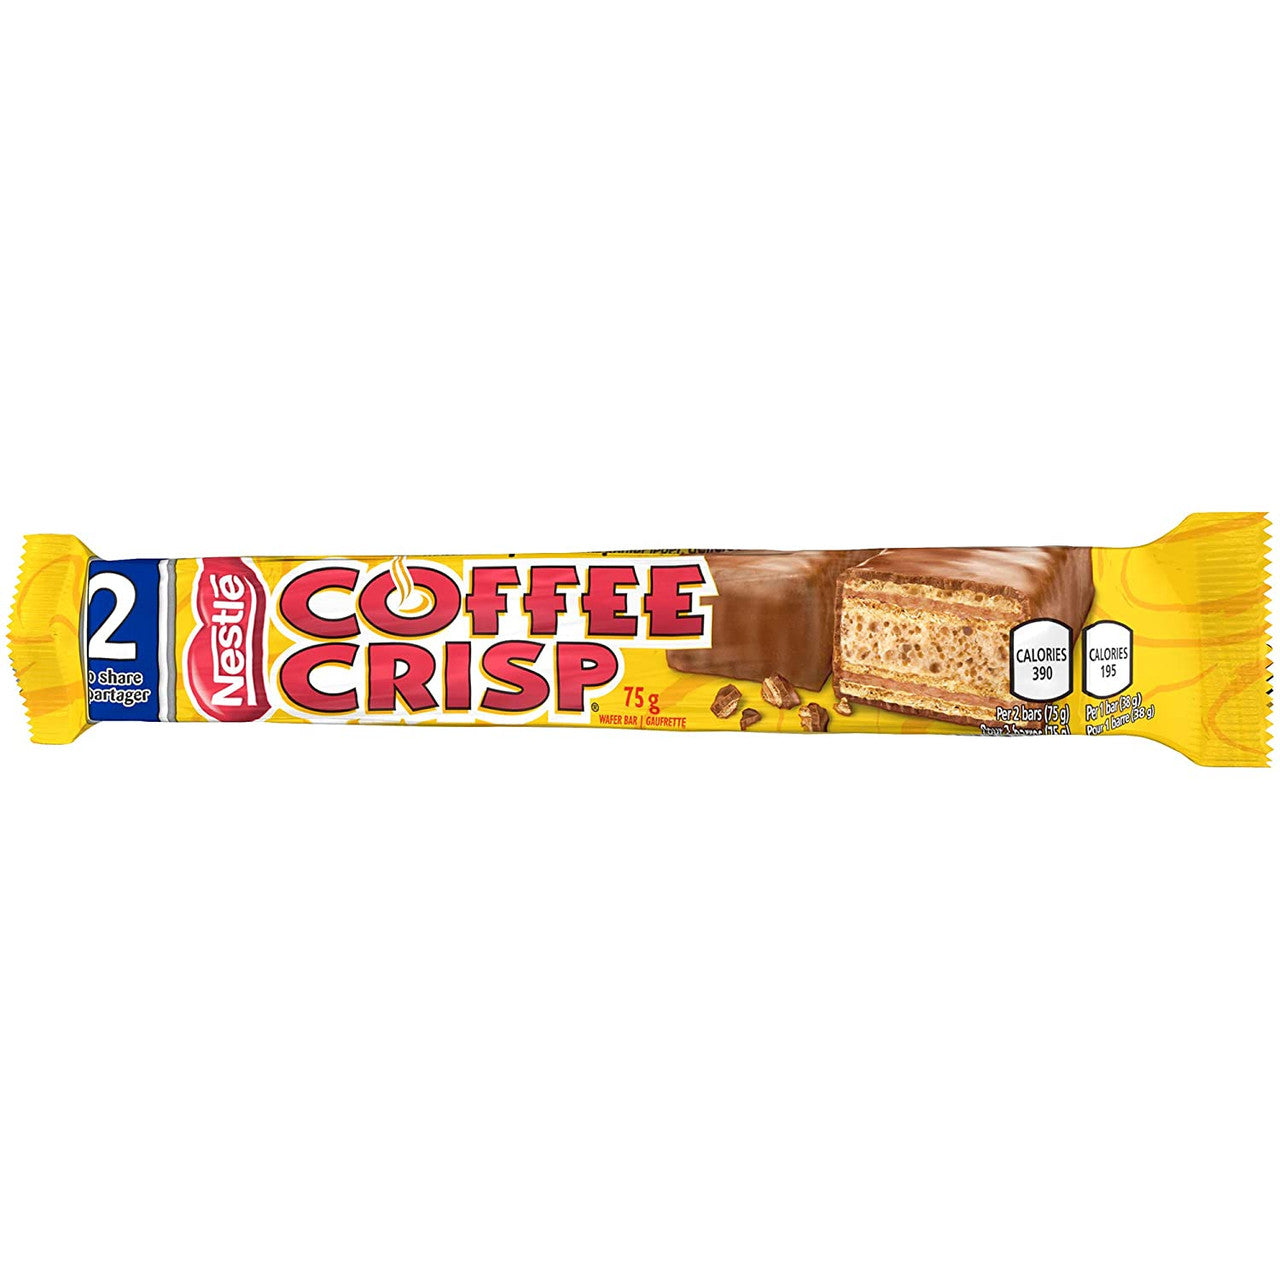 Nestle Coffee Crisp King Size, 24pk, 2 Bars in Each Pack, 75g/ Pack, {Imported from Canada}